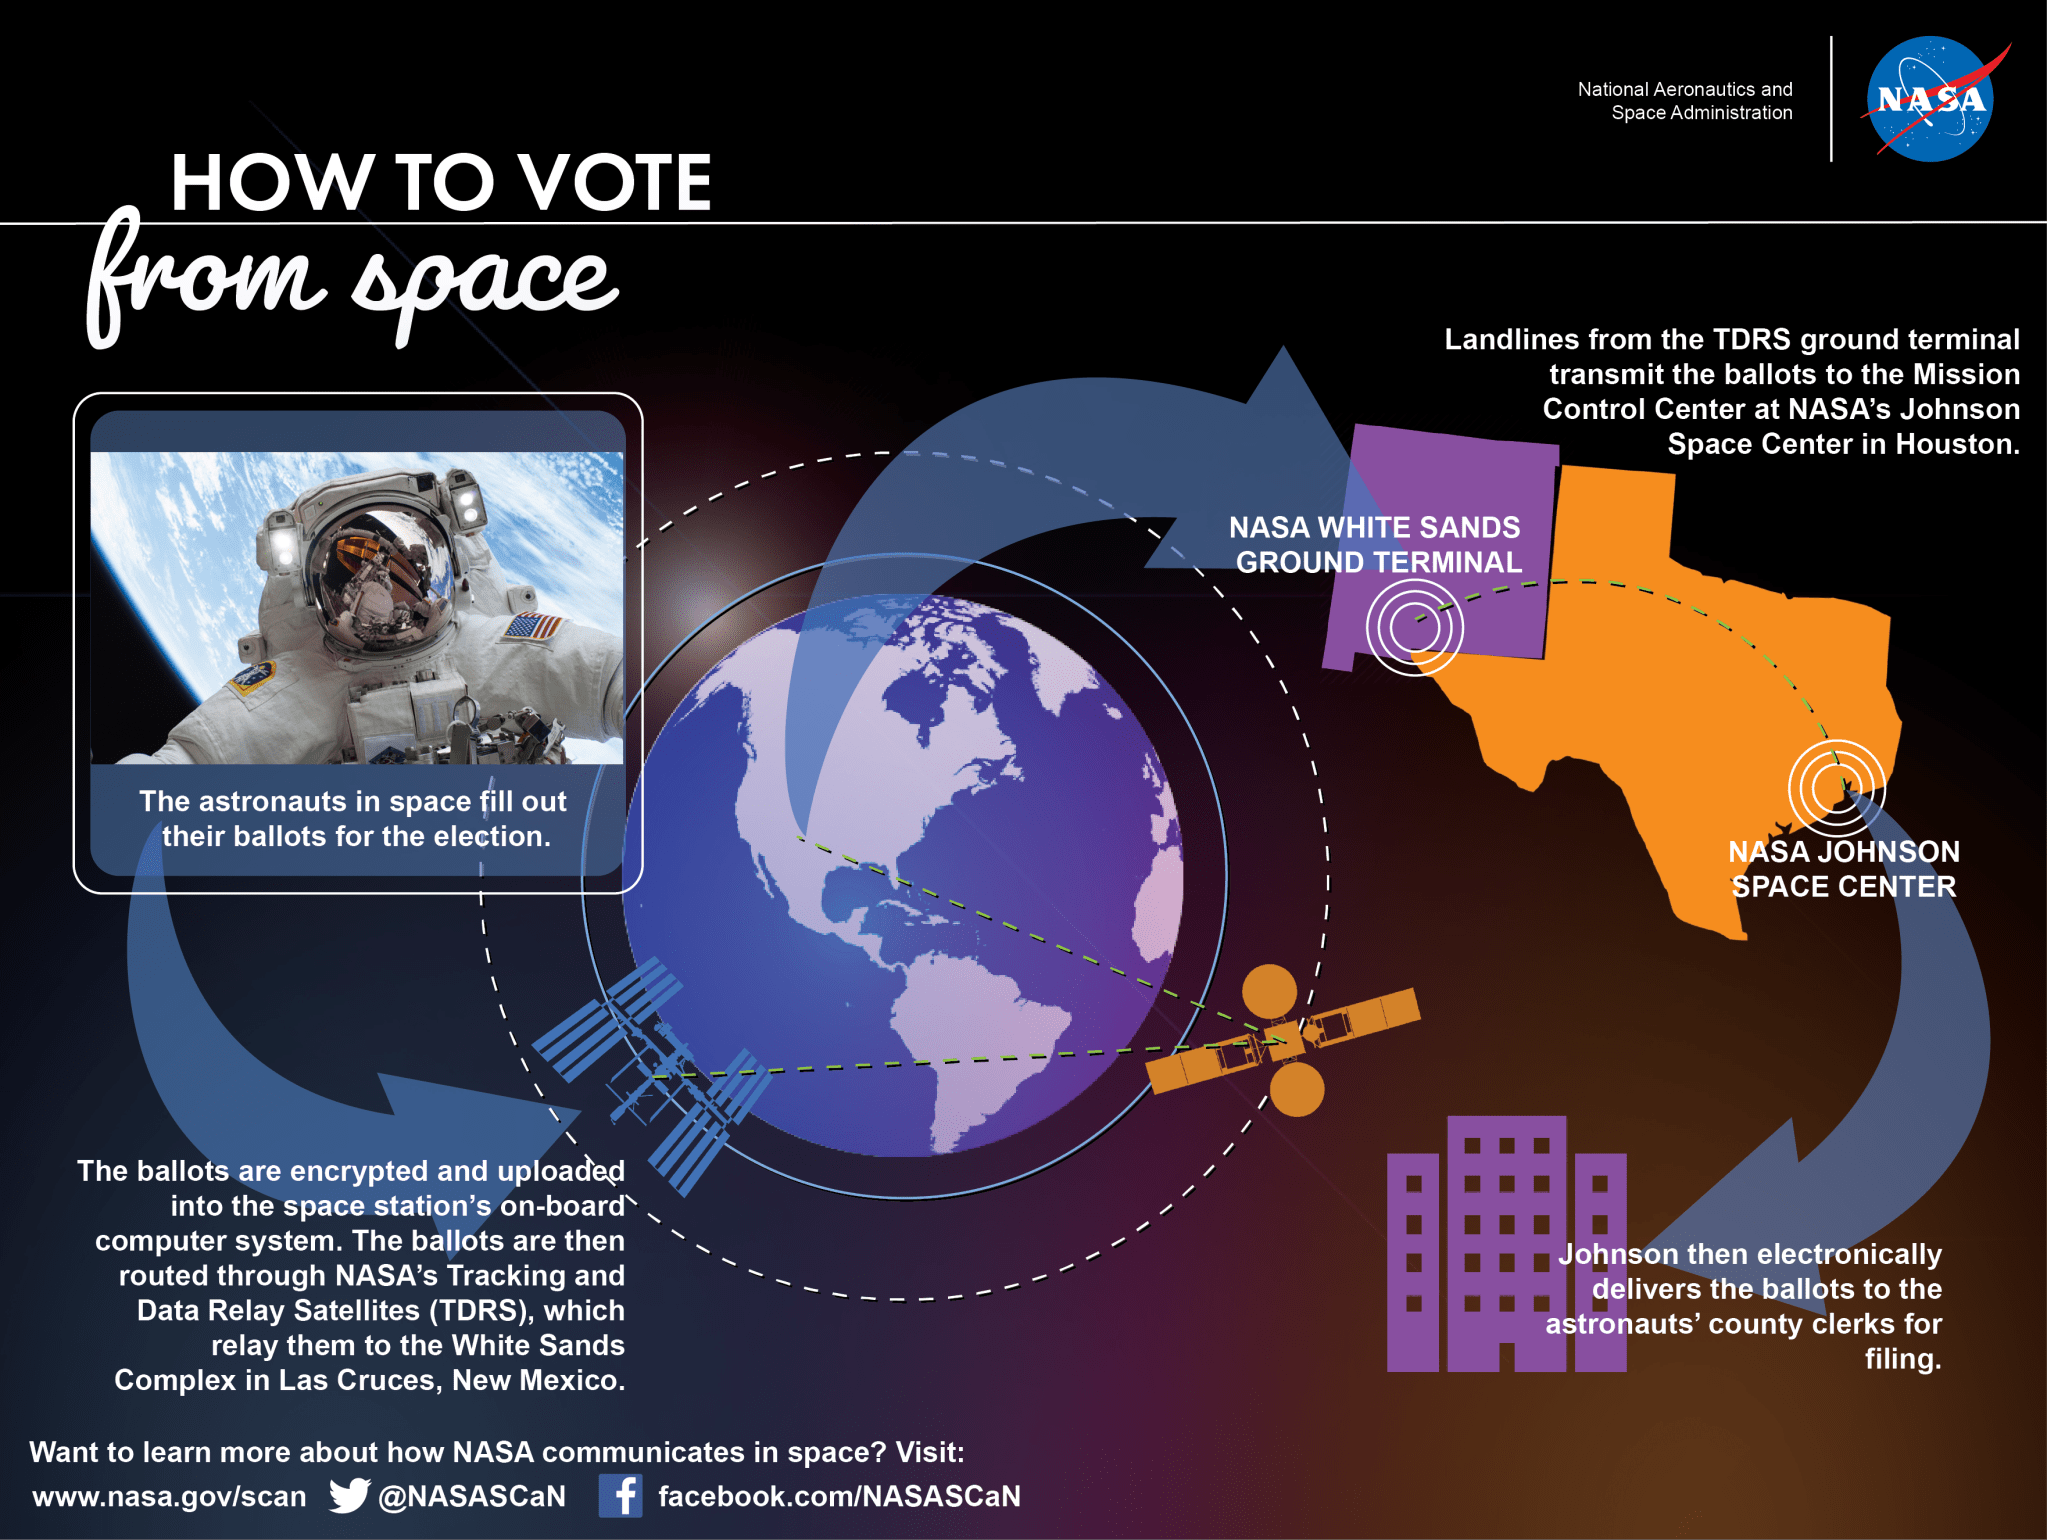 An infographic showing how ballots flow from the International Space Station to Mission Control through NASA's Space Network.